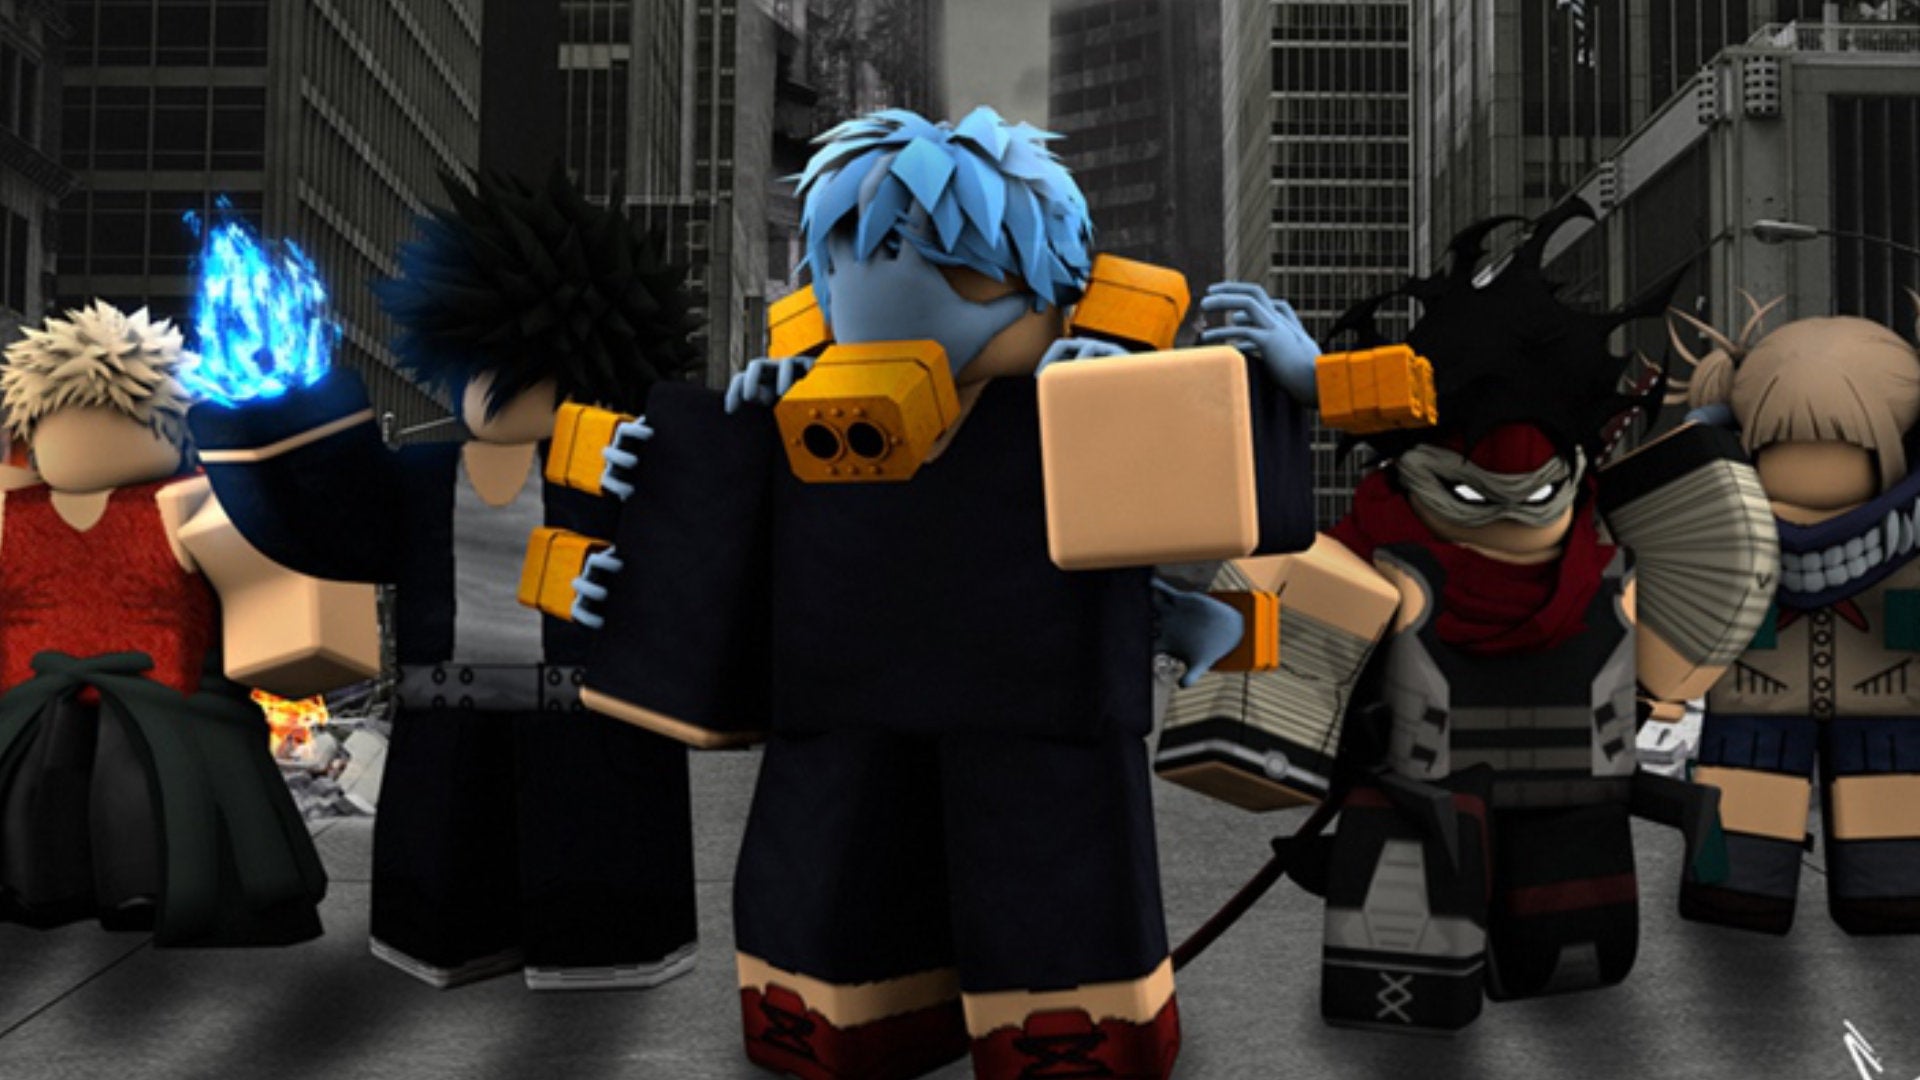 Promotional art for Roblox game Boku No Roblox, showcasing a group of characters standing in a line facing the camera.